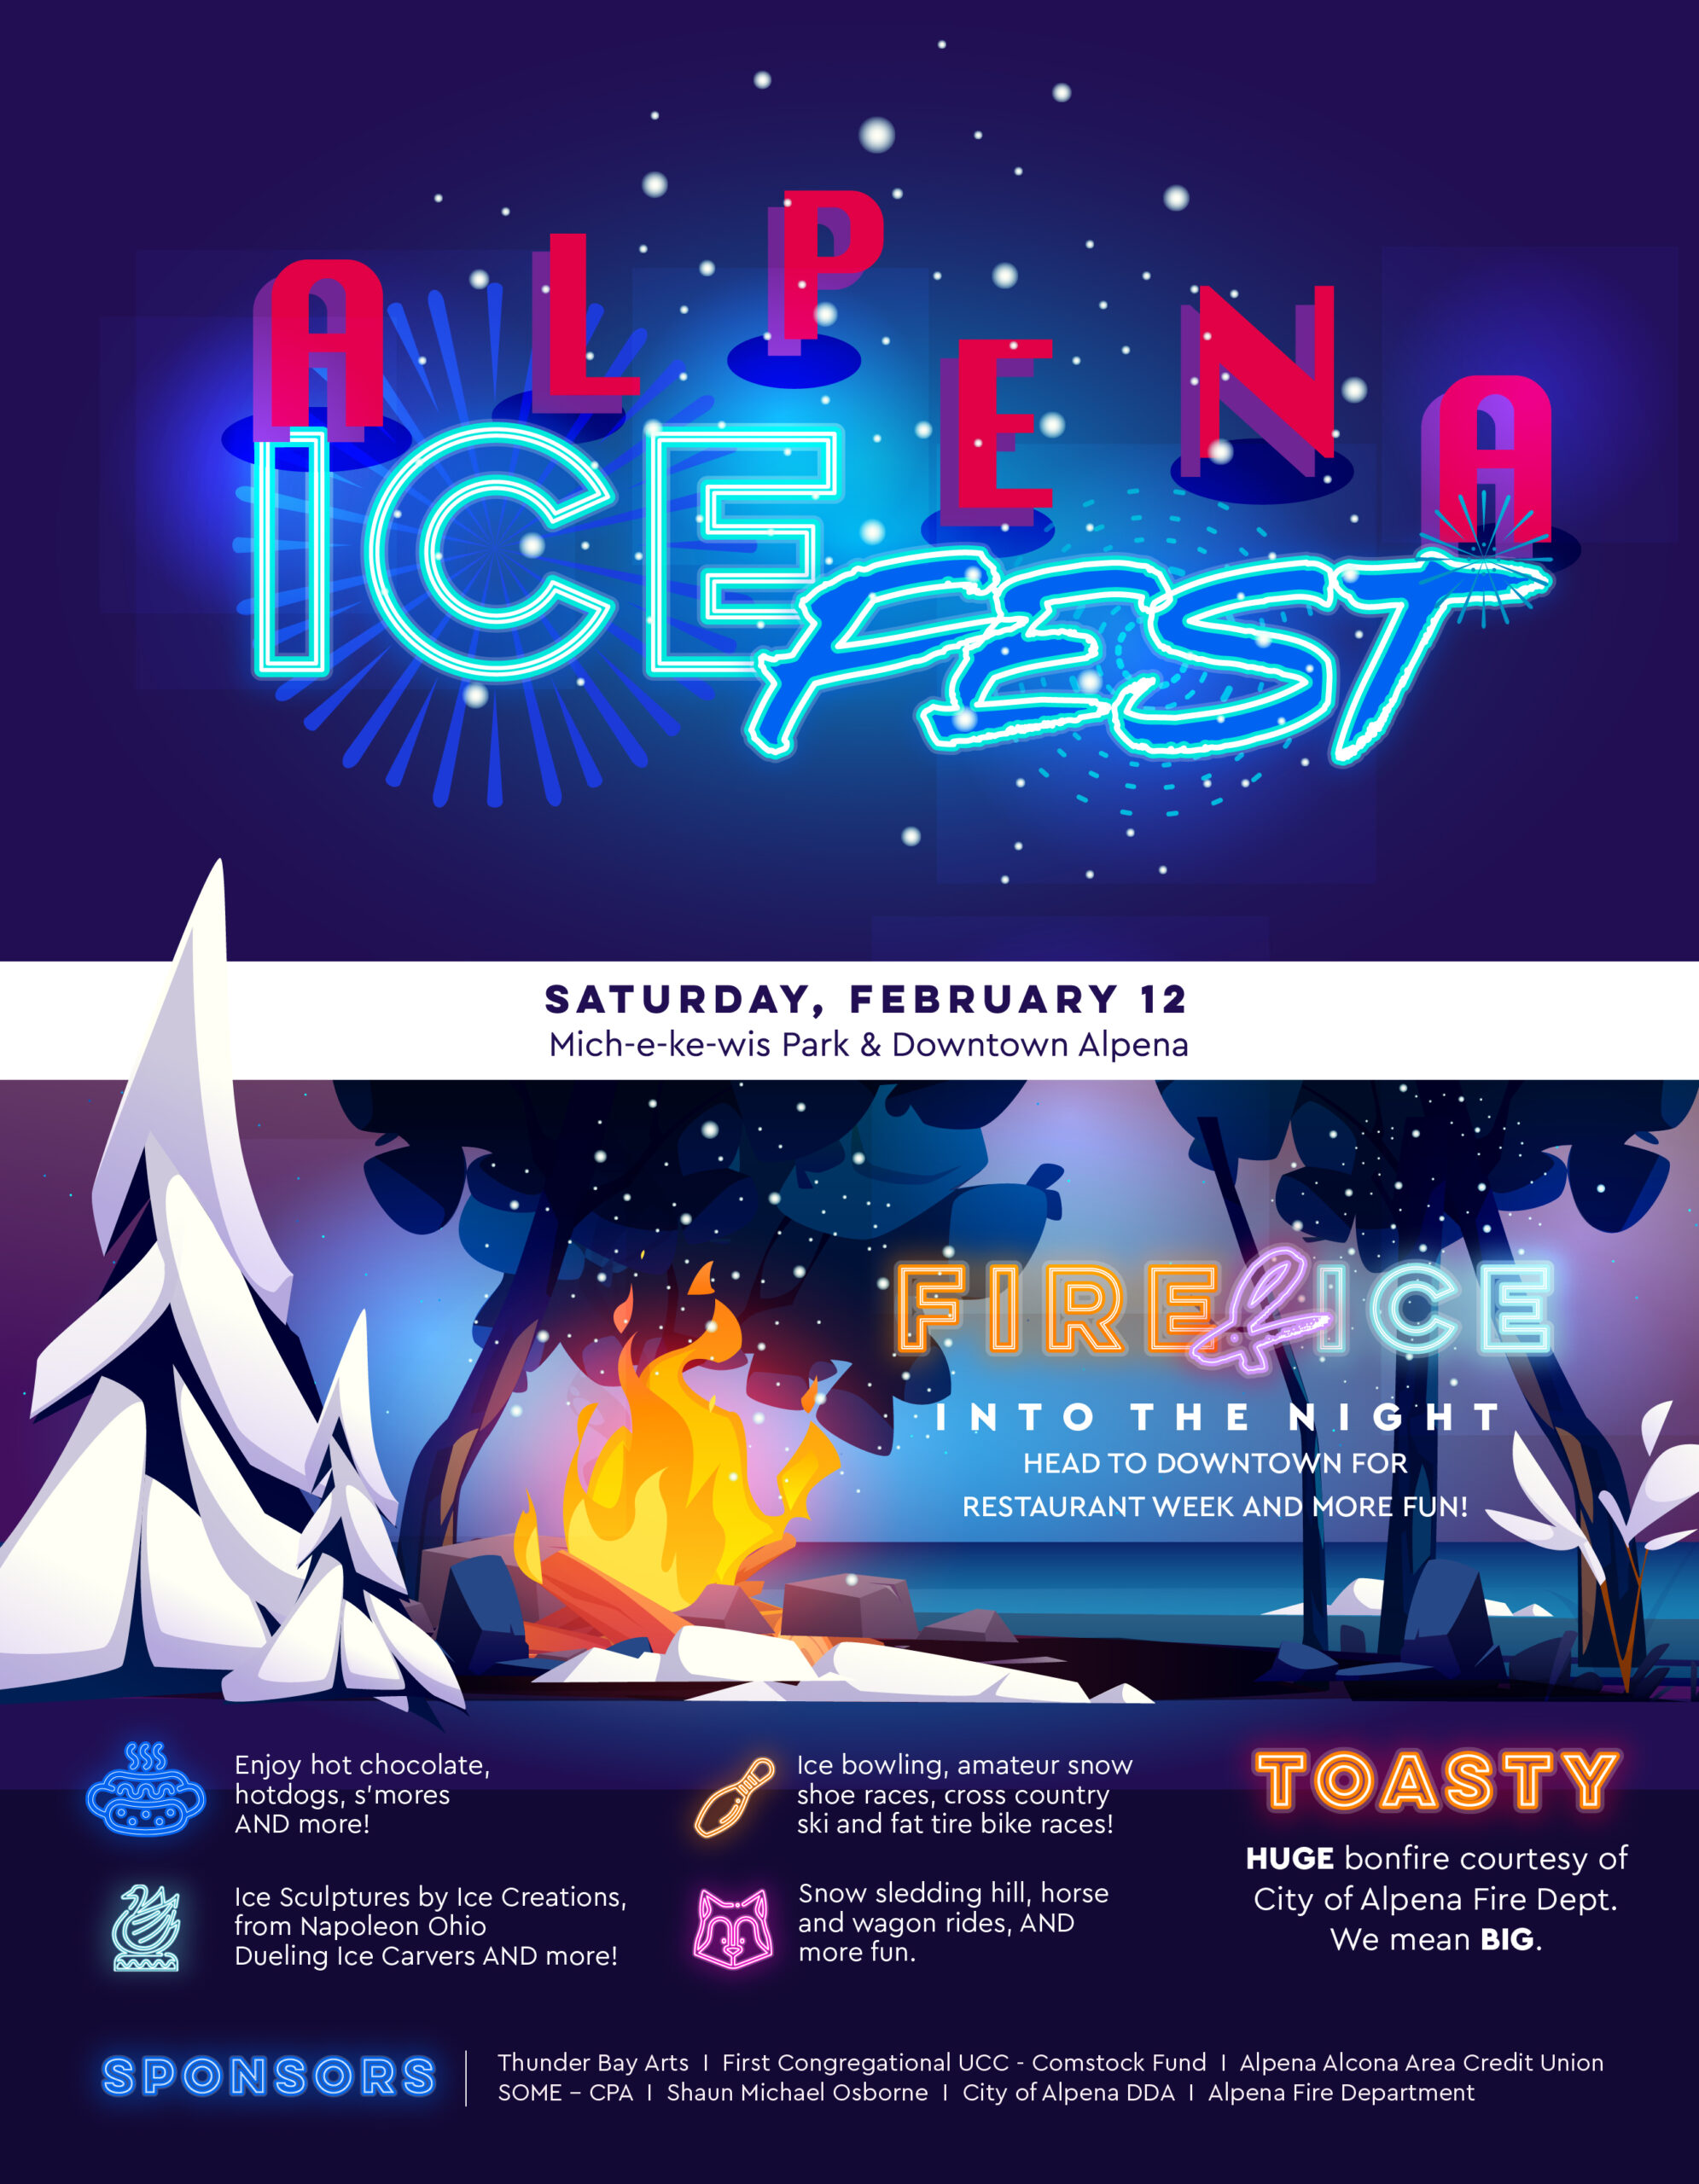 A Complete Guide to Alpena’s Ice Festival at Mich-e-ke-wis Park